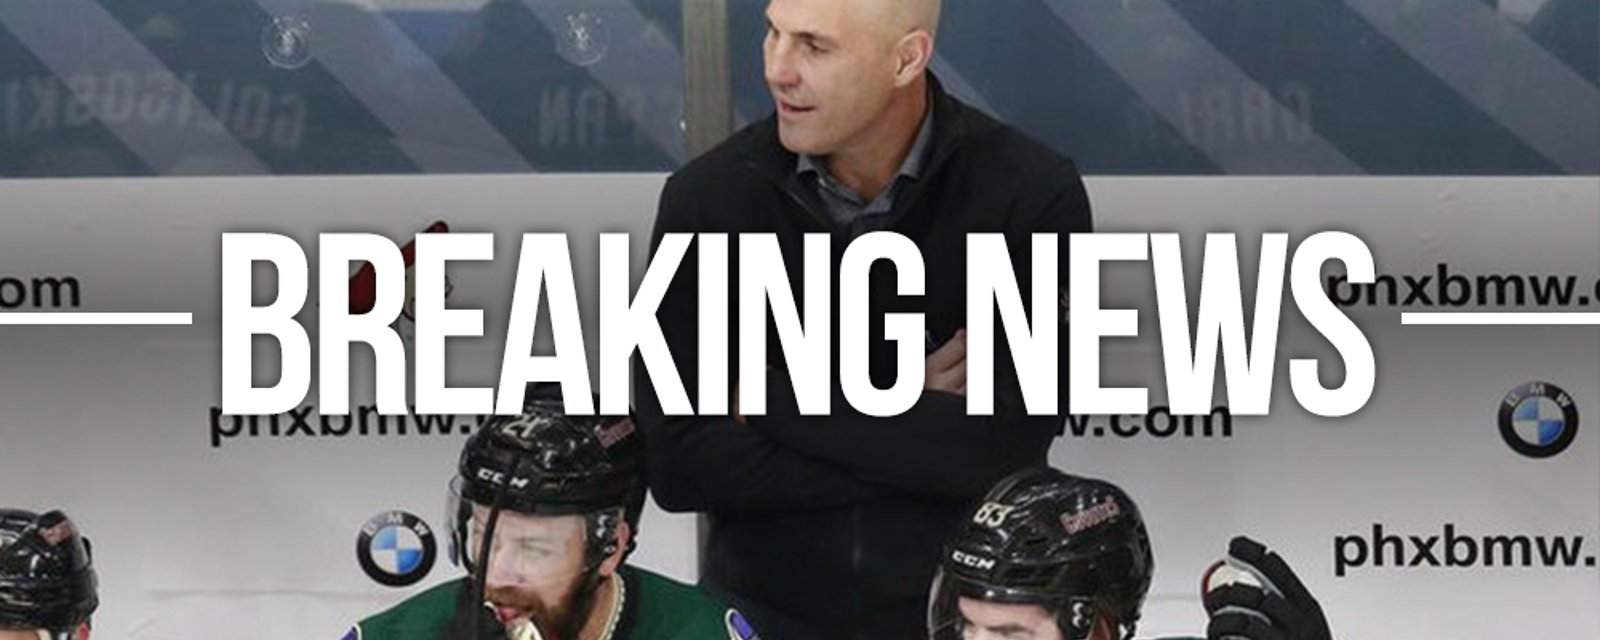 Coach Tocchet torches Coyotes after blowout loss:  “It was men against boys”